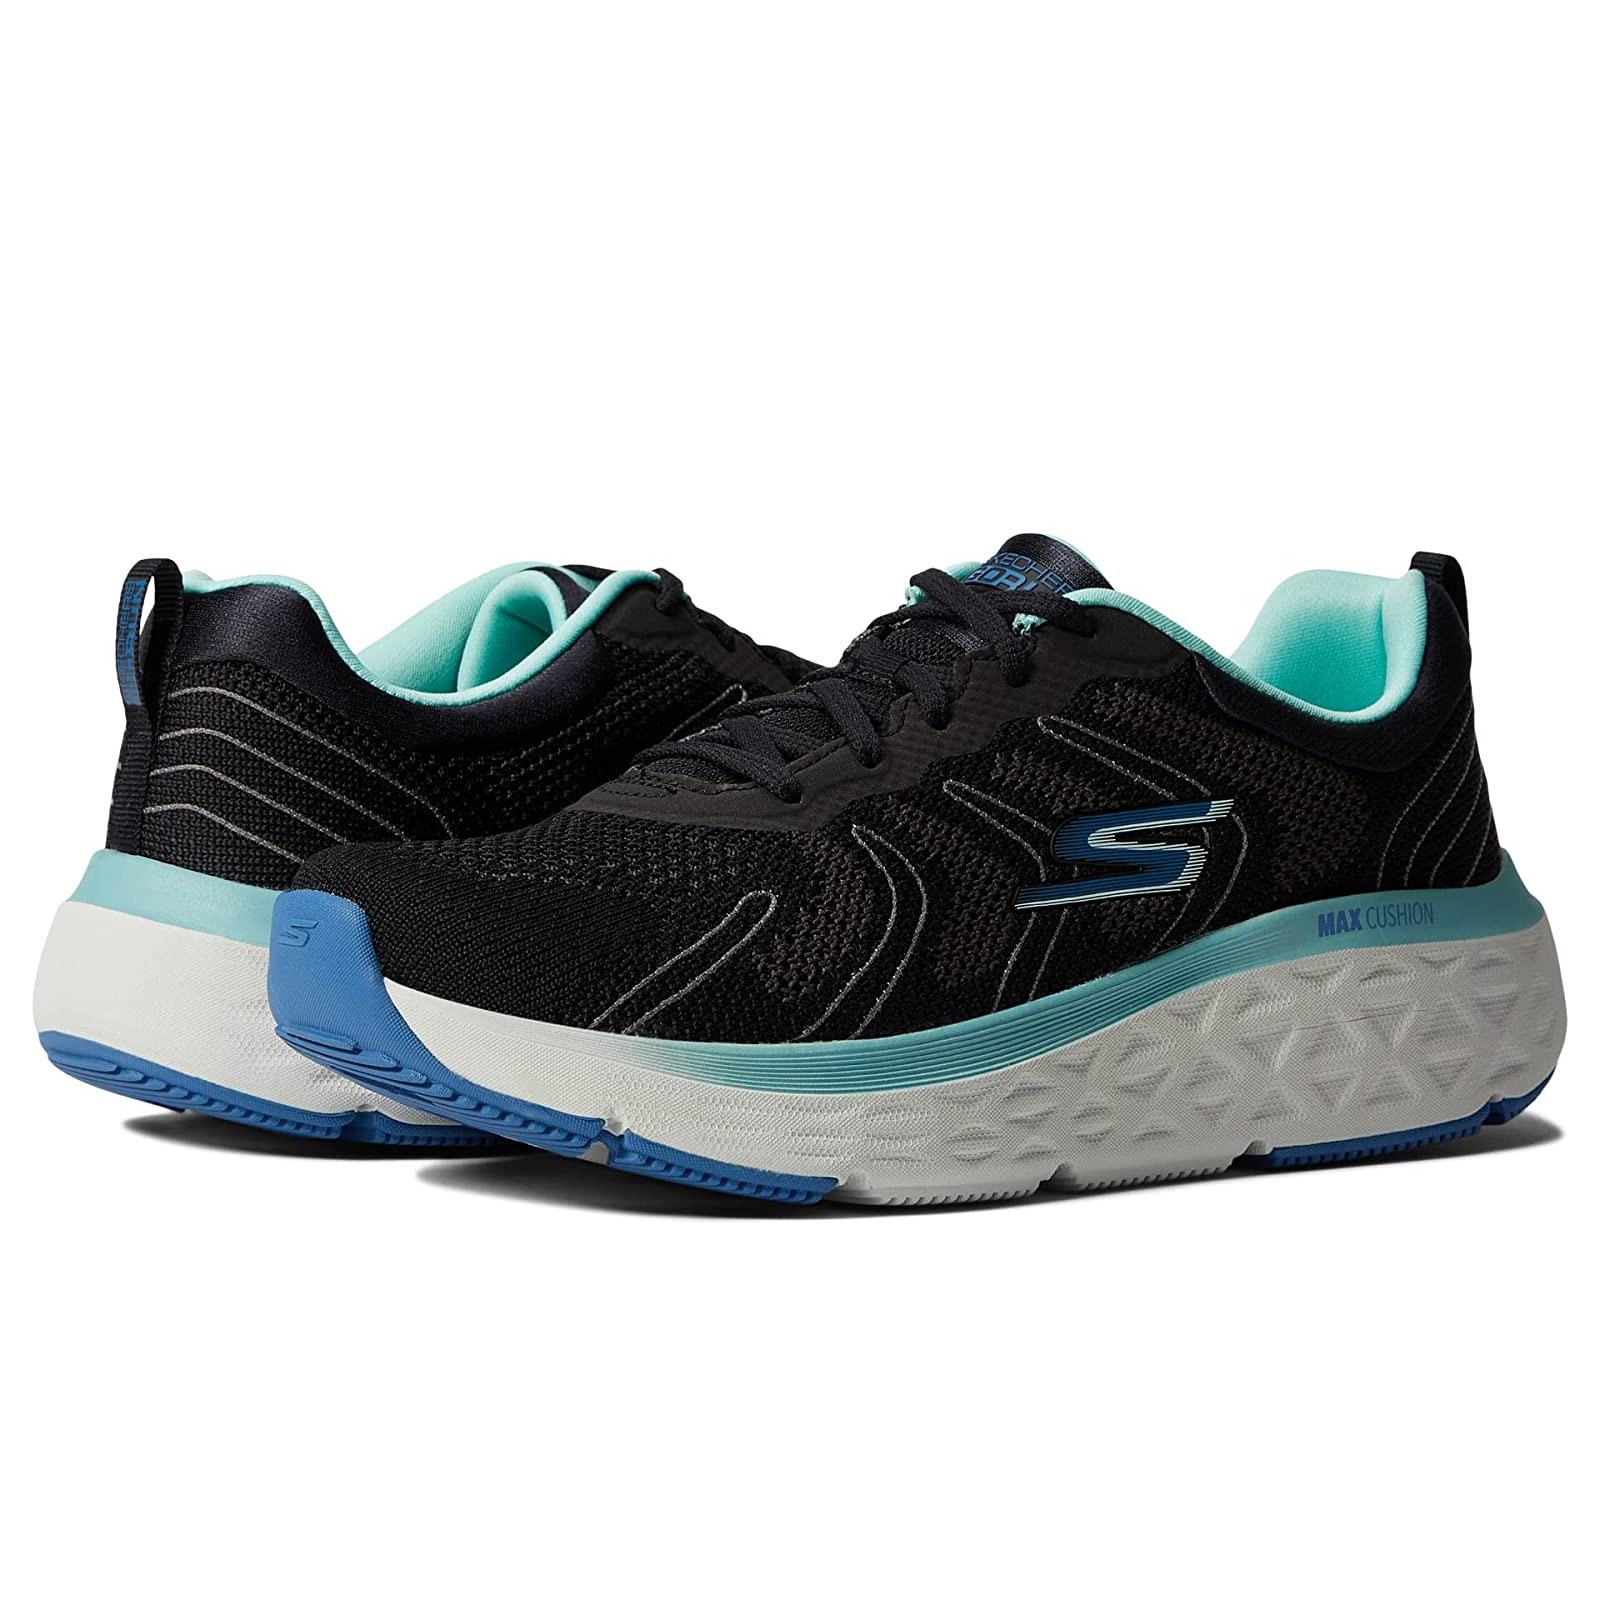 Woman`s Sneakers Athletic Shoes Skechers Max Cushioning Delta Black/Blue